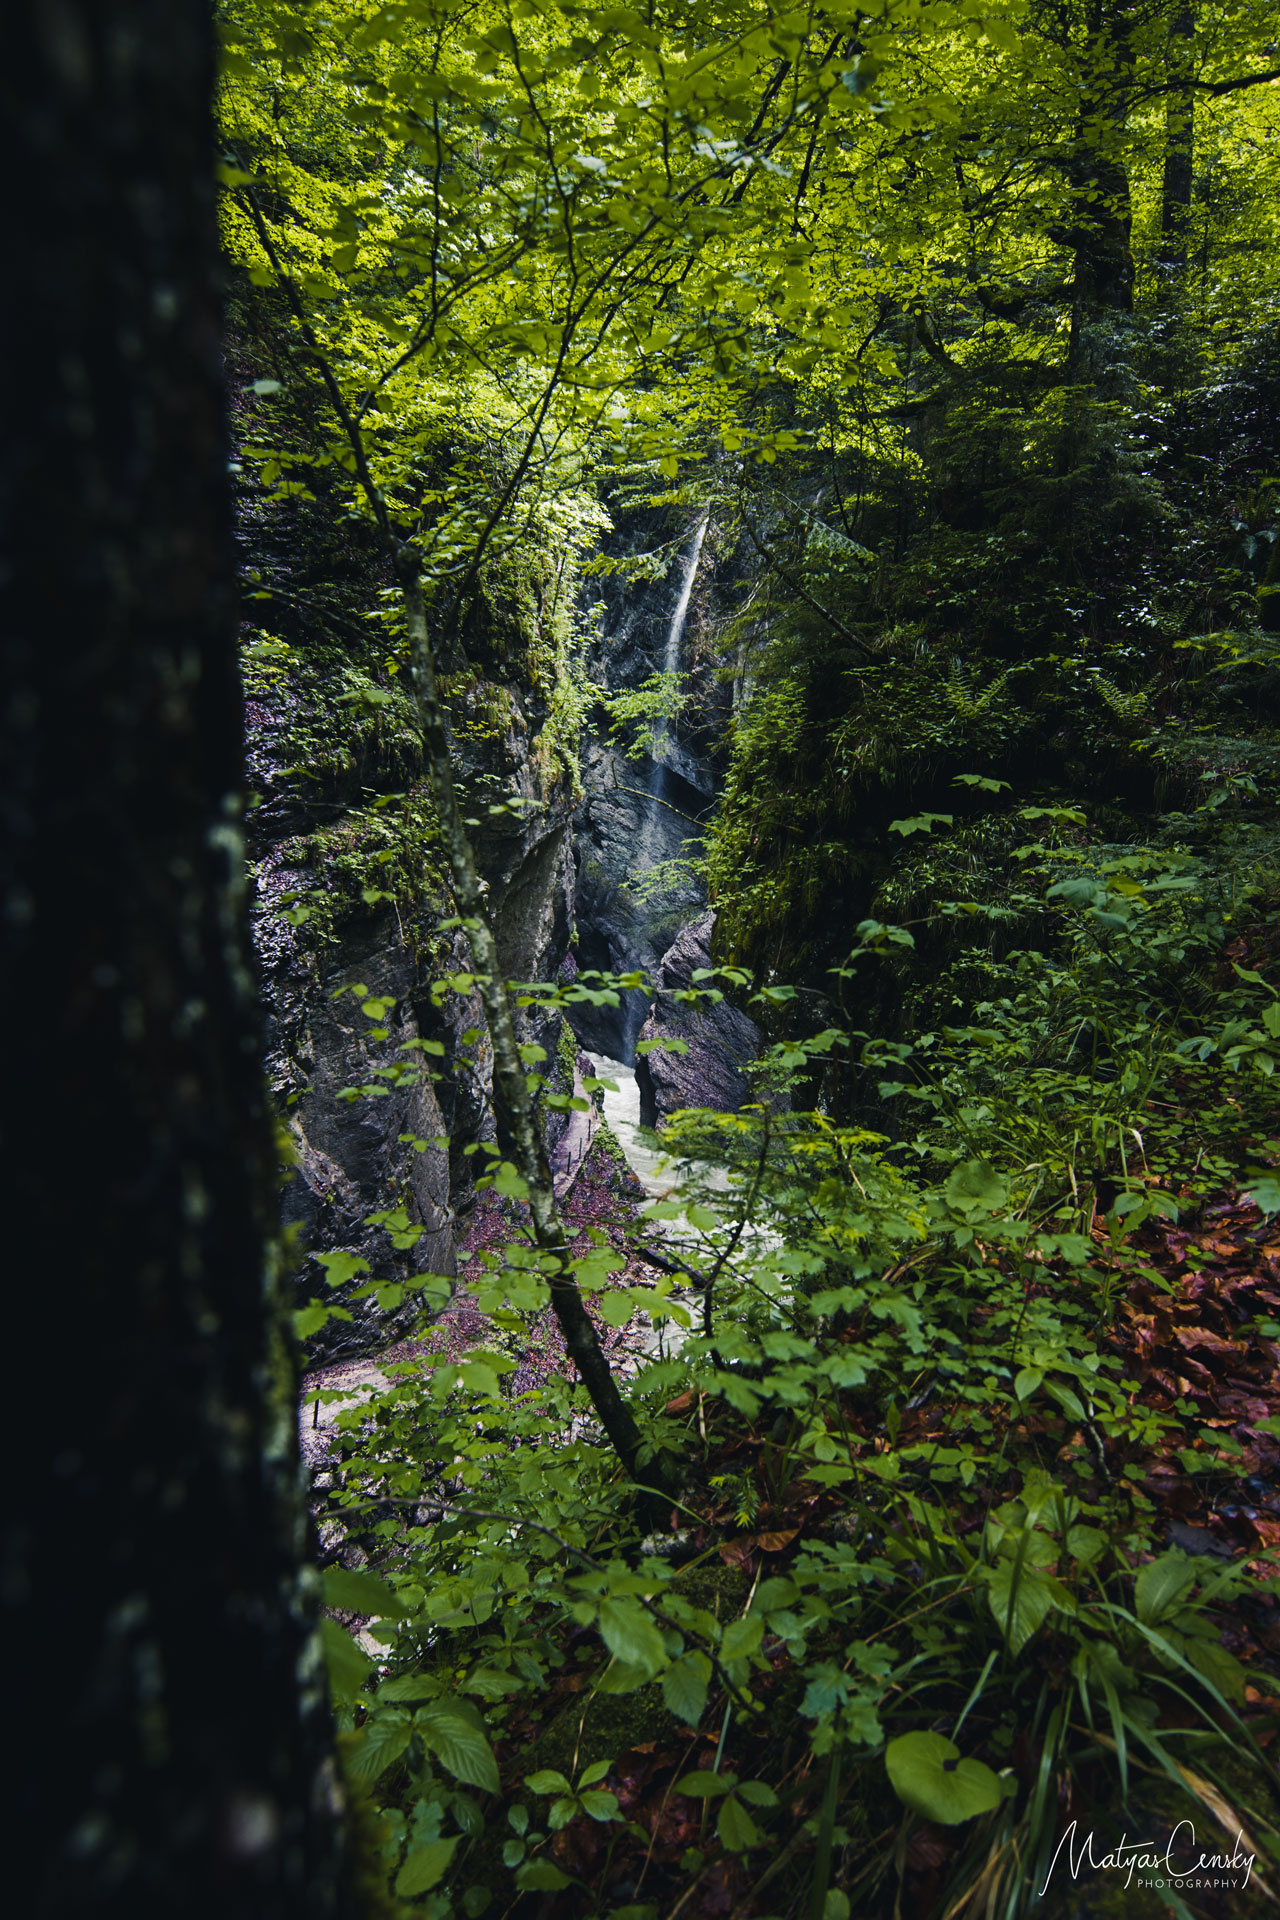 Photo of a waterfall and wild river in a canyon taken from behing a tree in a forest above in a rainy weather in Partnachklamm, Austria.